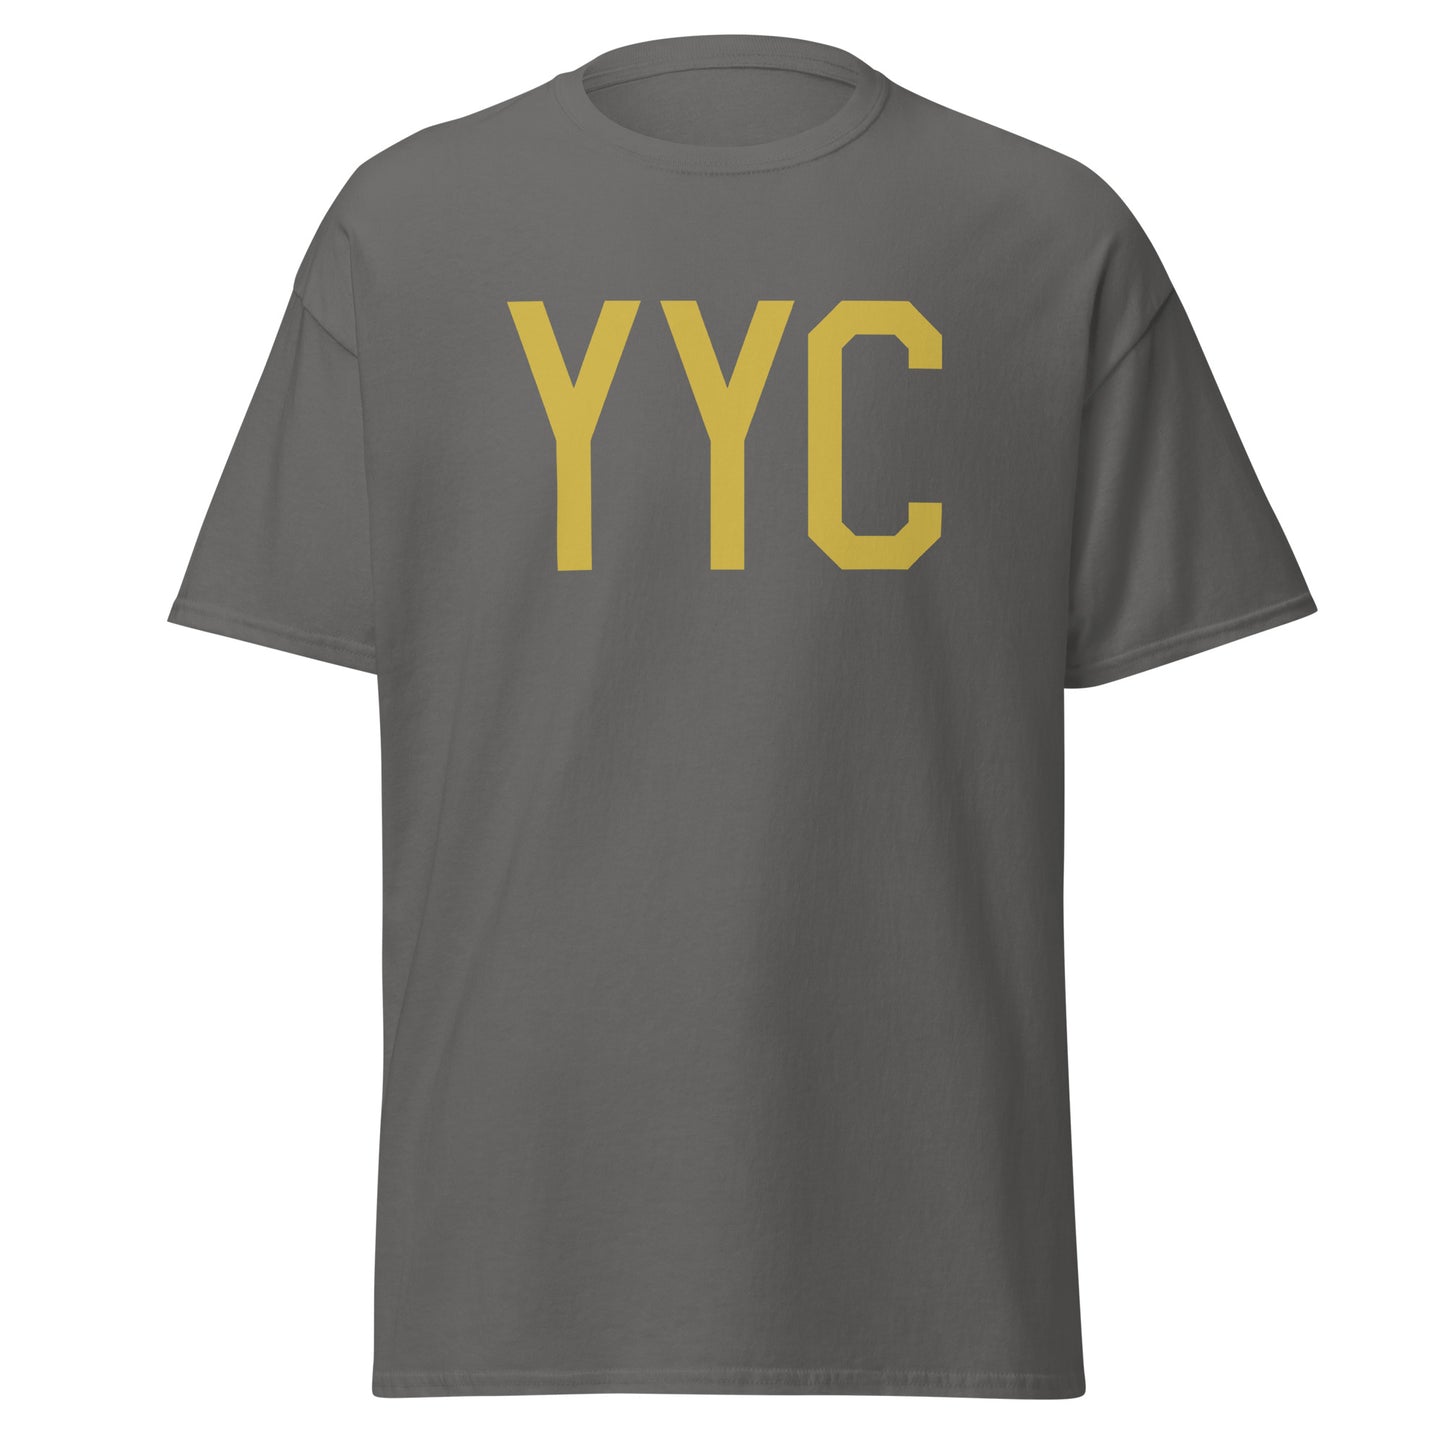 Aviation Enthusiast Men's Tee - Old Gold Graphic • YYC Calgary • YHM Designs - Image 05